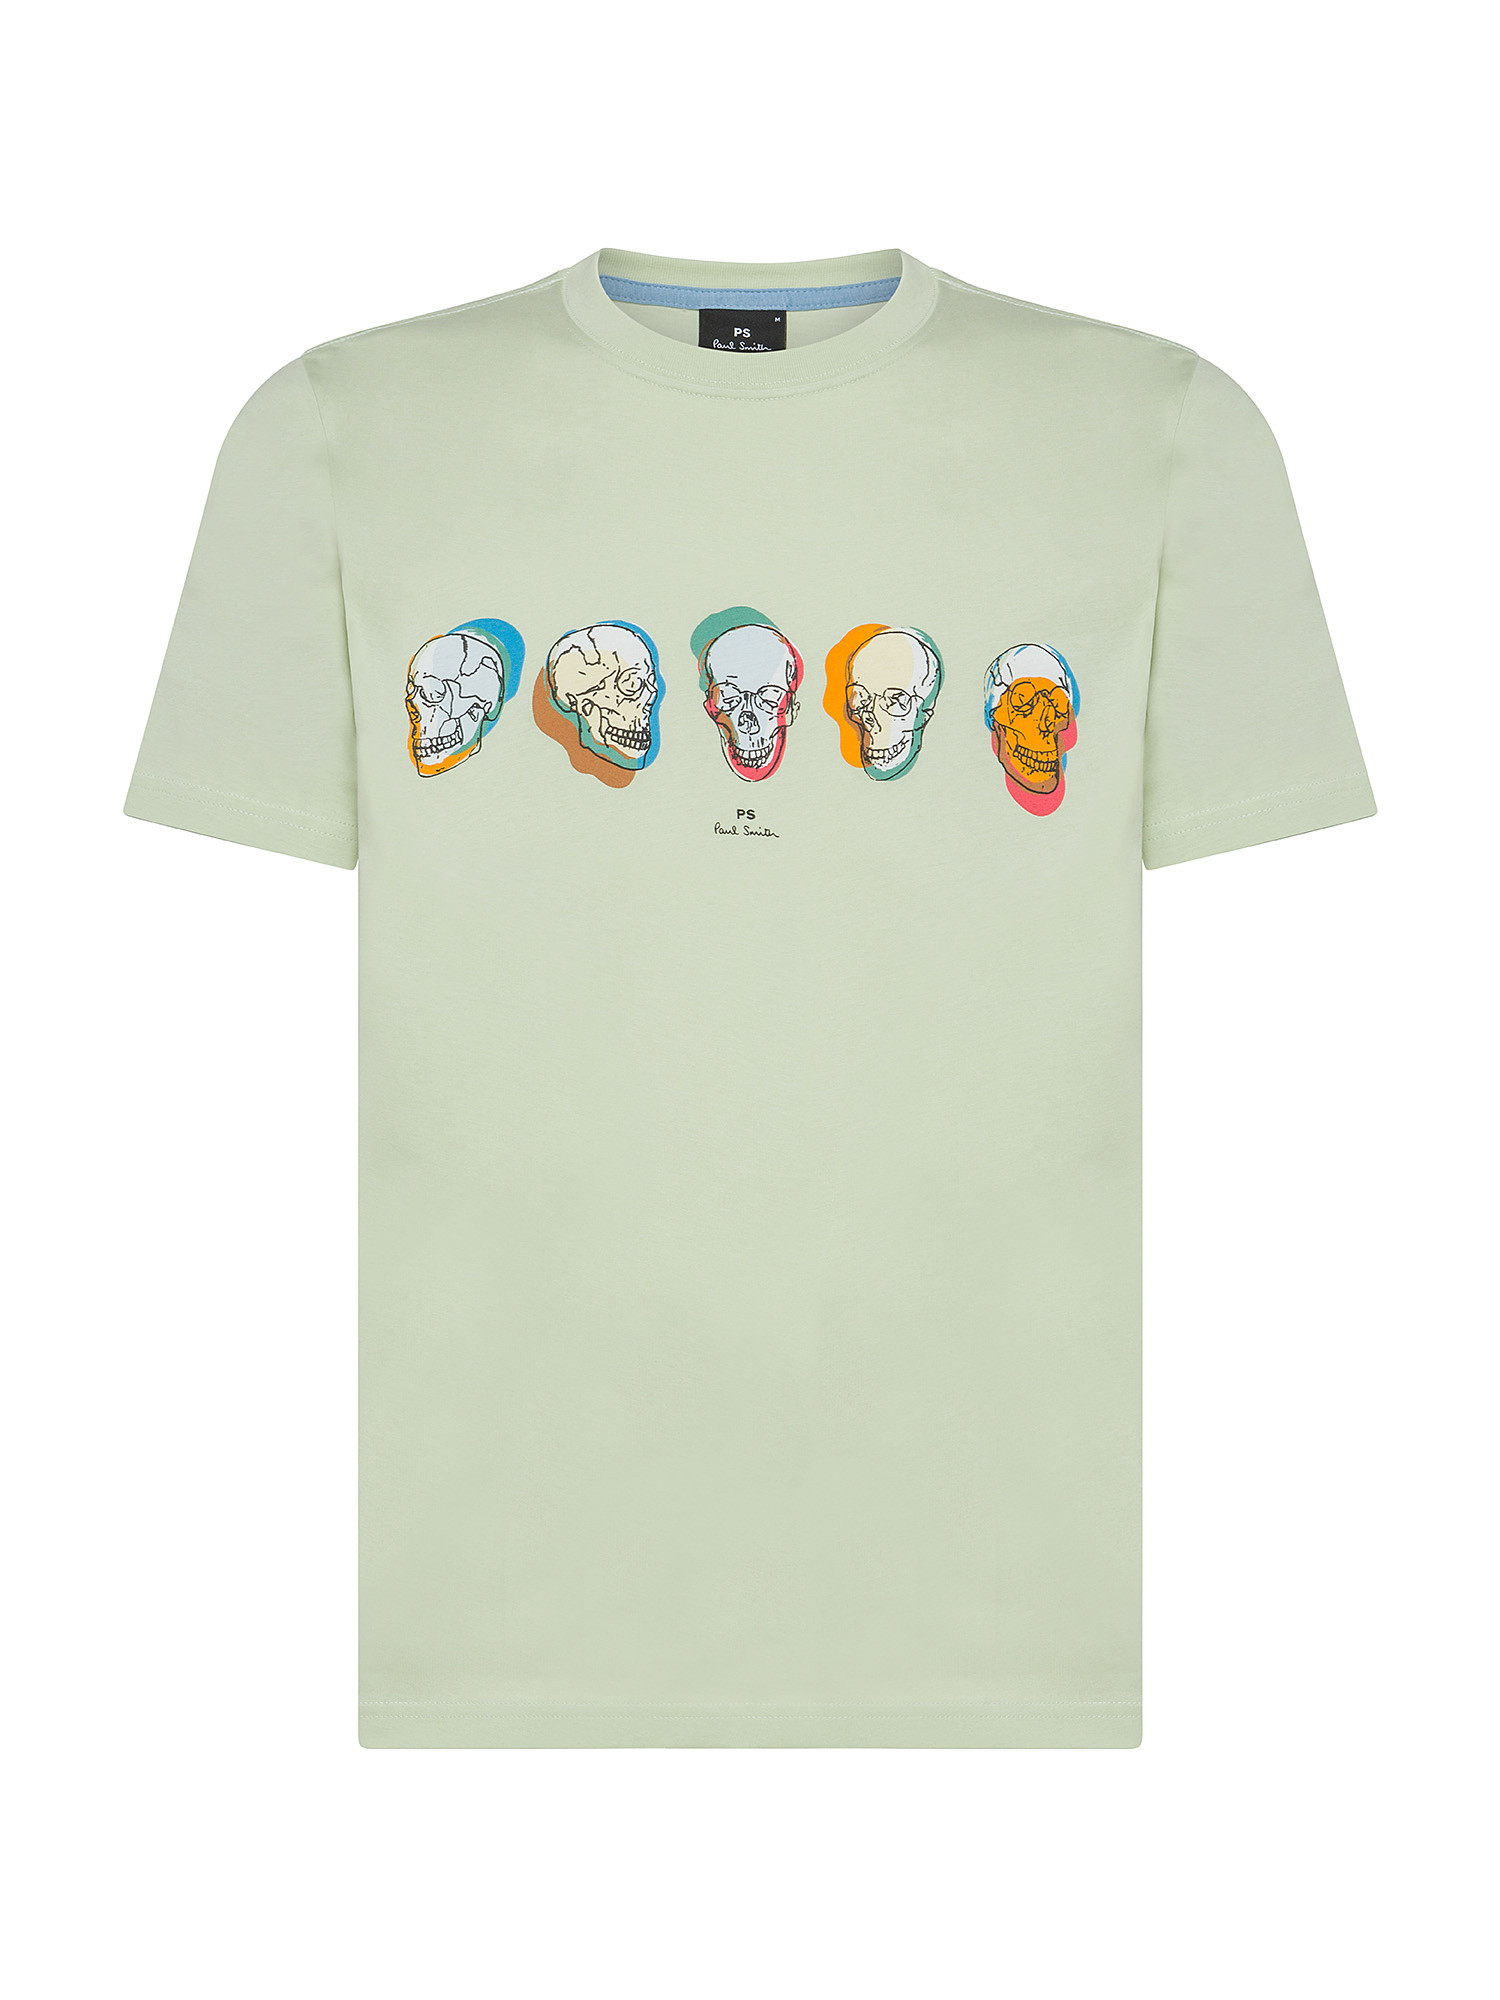 Paul Smith - Cotton T-shirt with skull print, Green, large image number 0